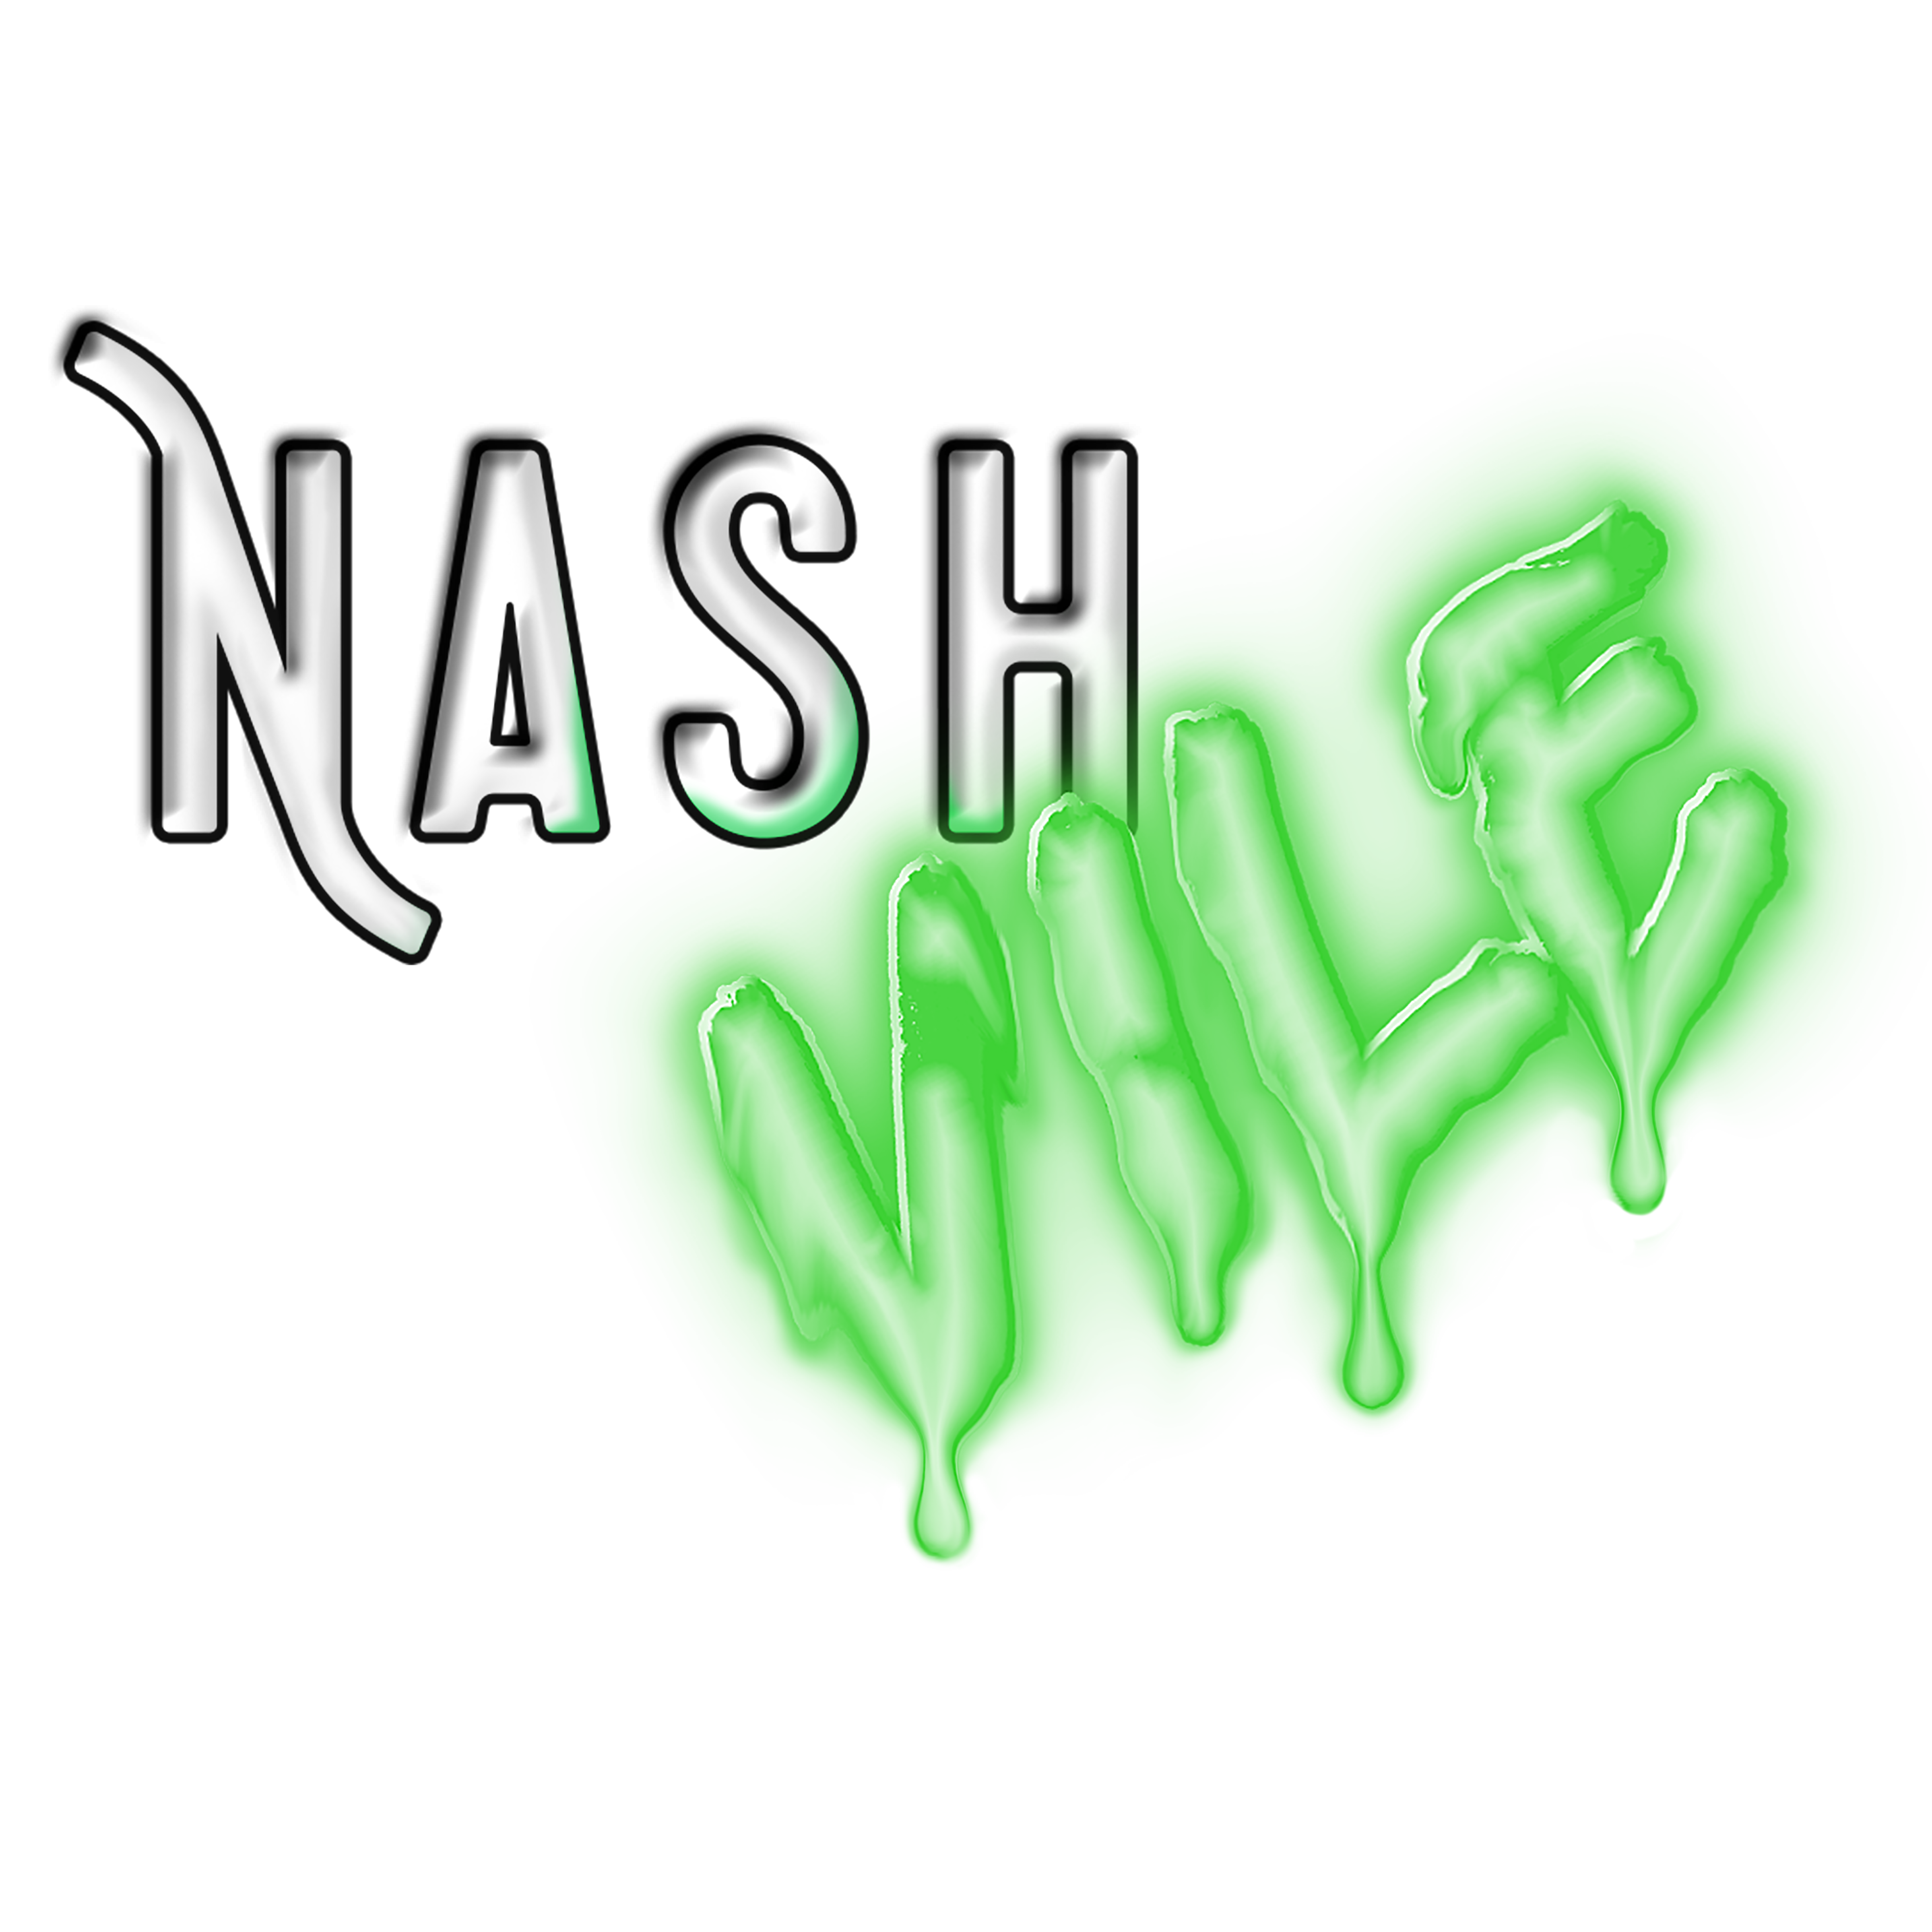 Nash Vile, a Nashville-based media production company, generates buzz and highlights all alternative genres of music and art created in Music City.